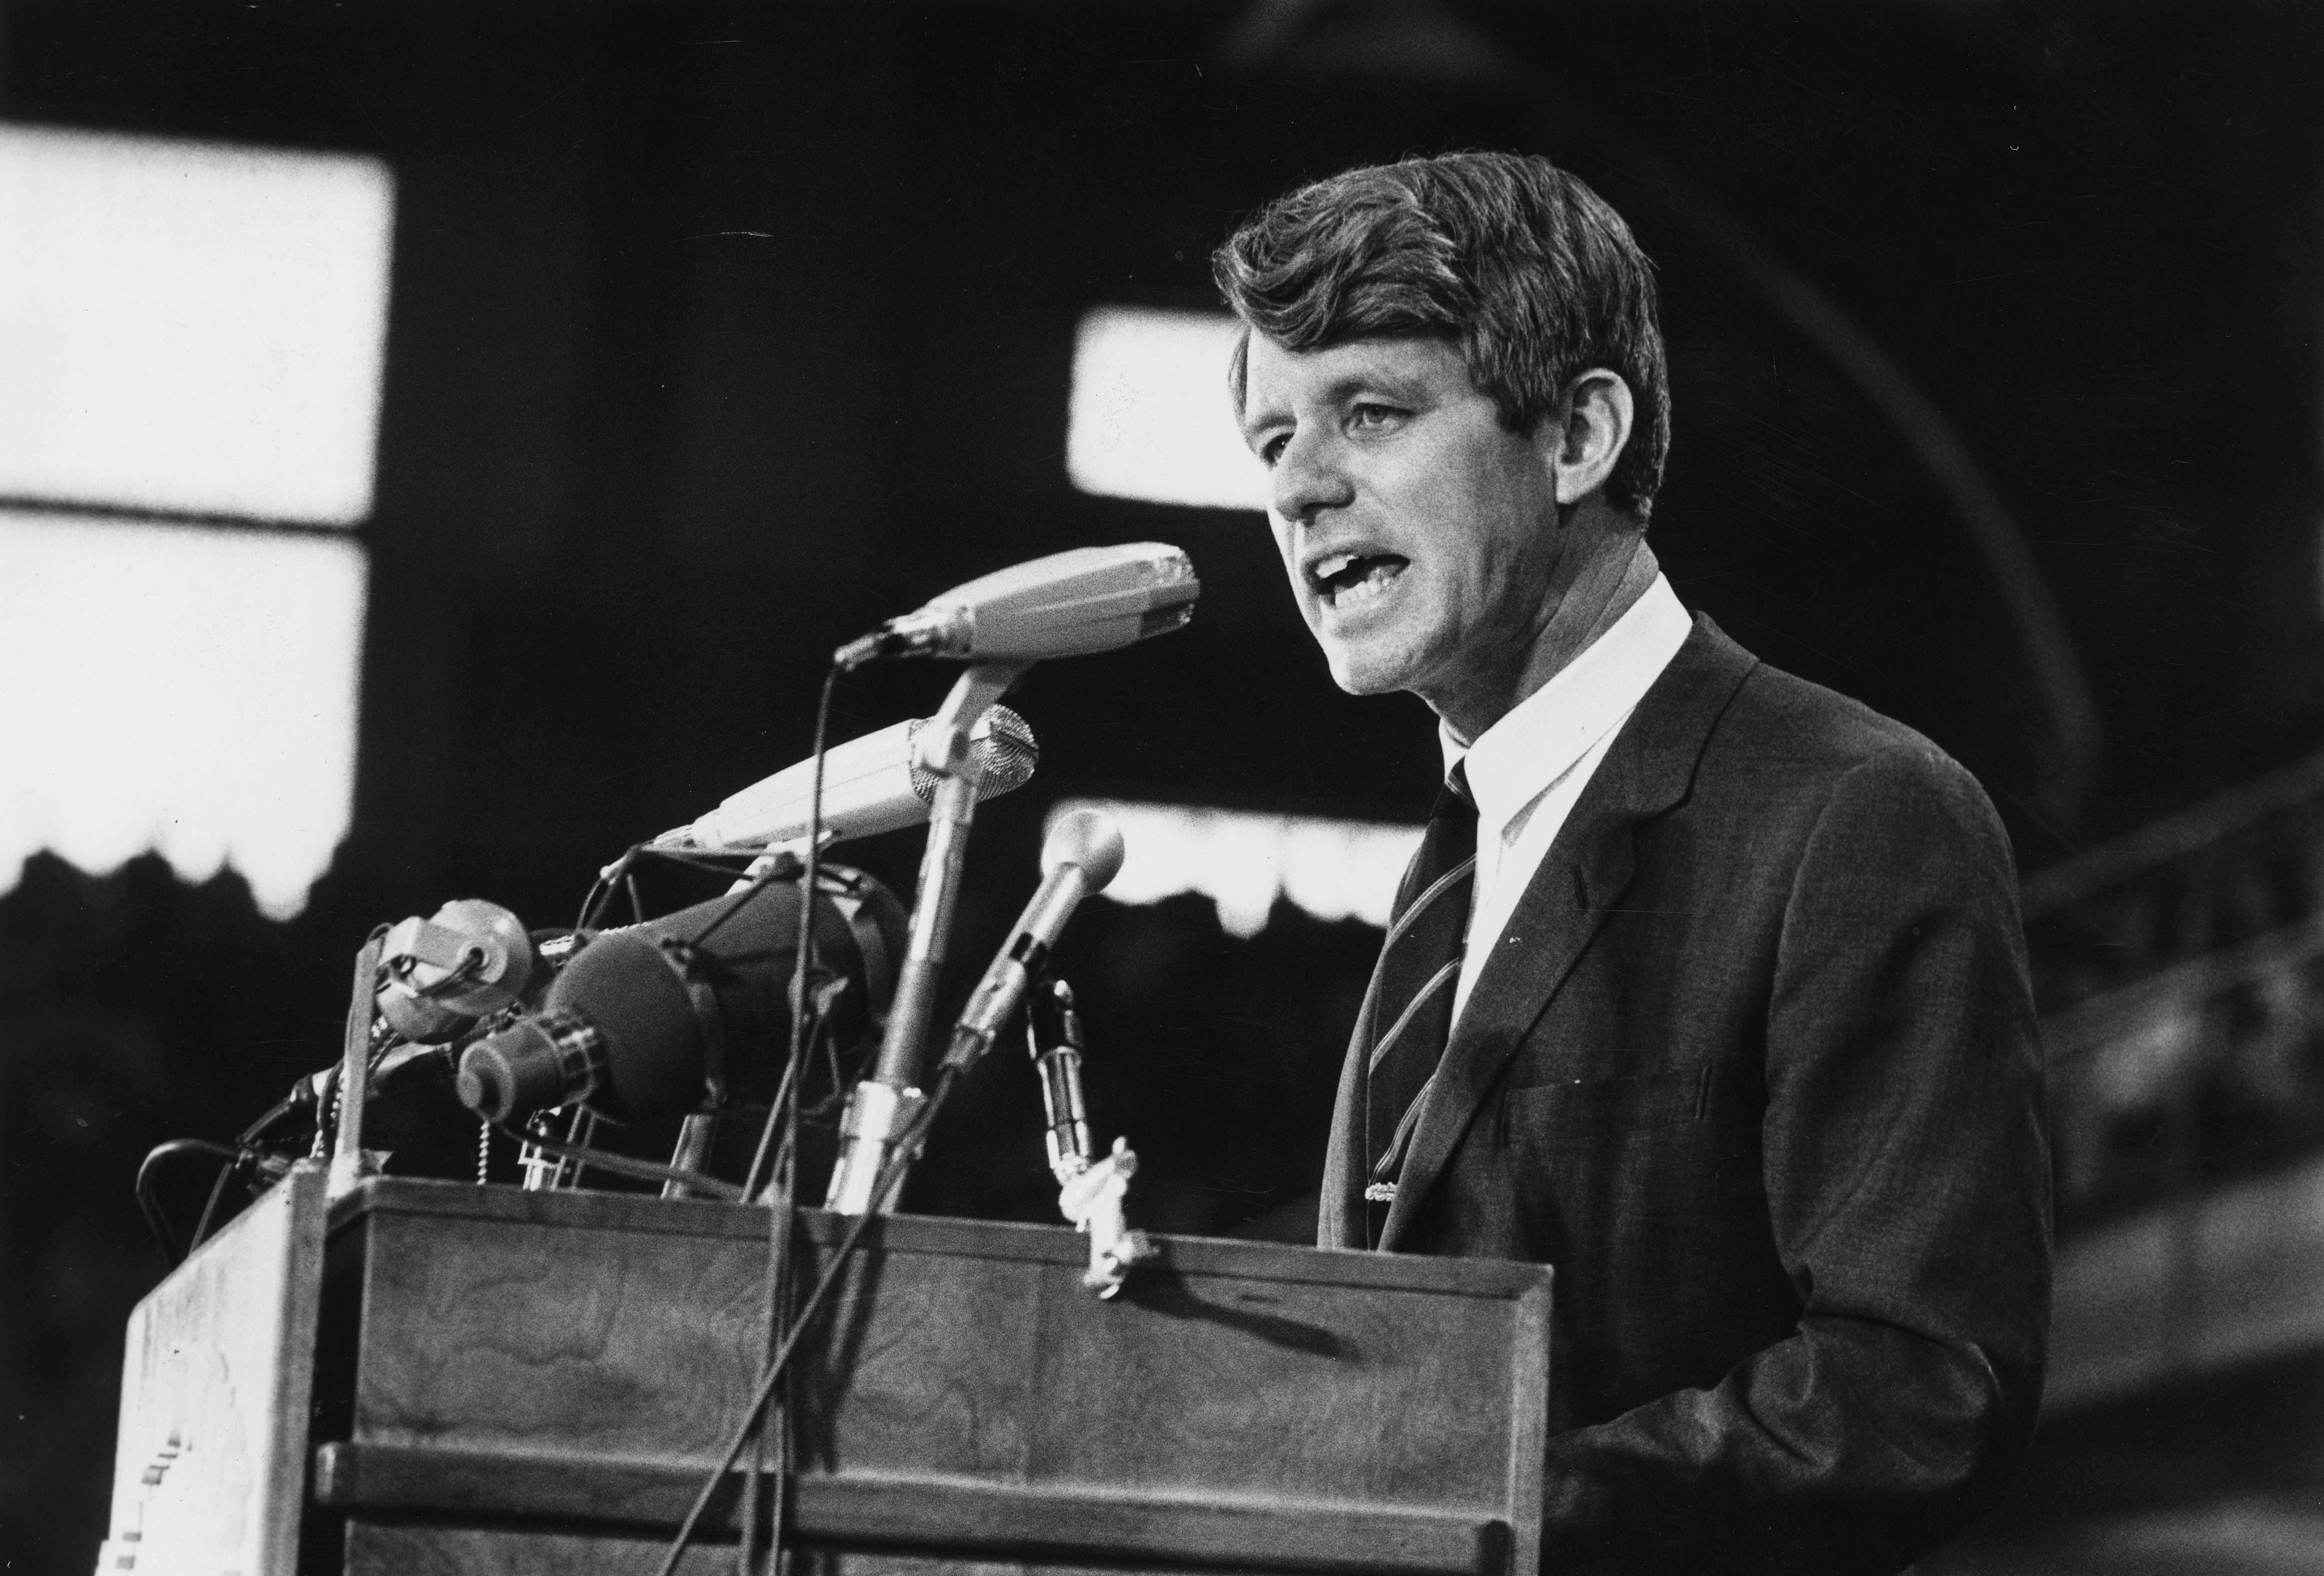 In March 1968, Robert Kennedy spoke of the limitations of gross domestic product